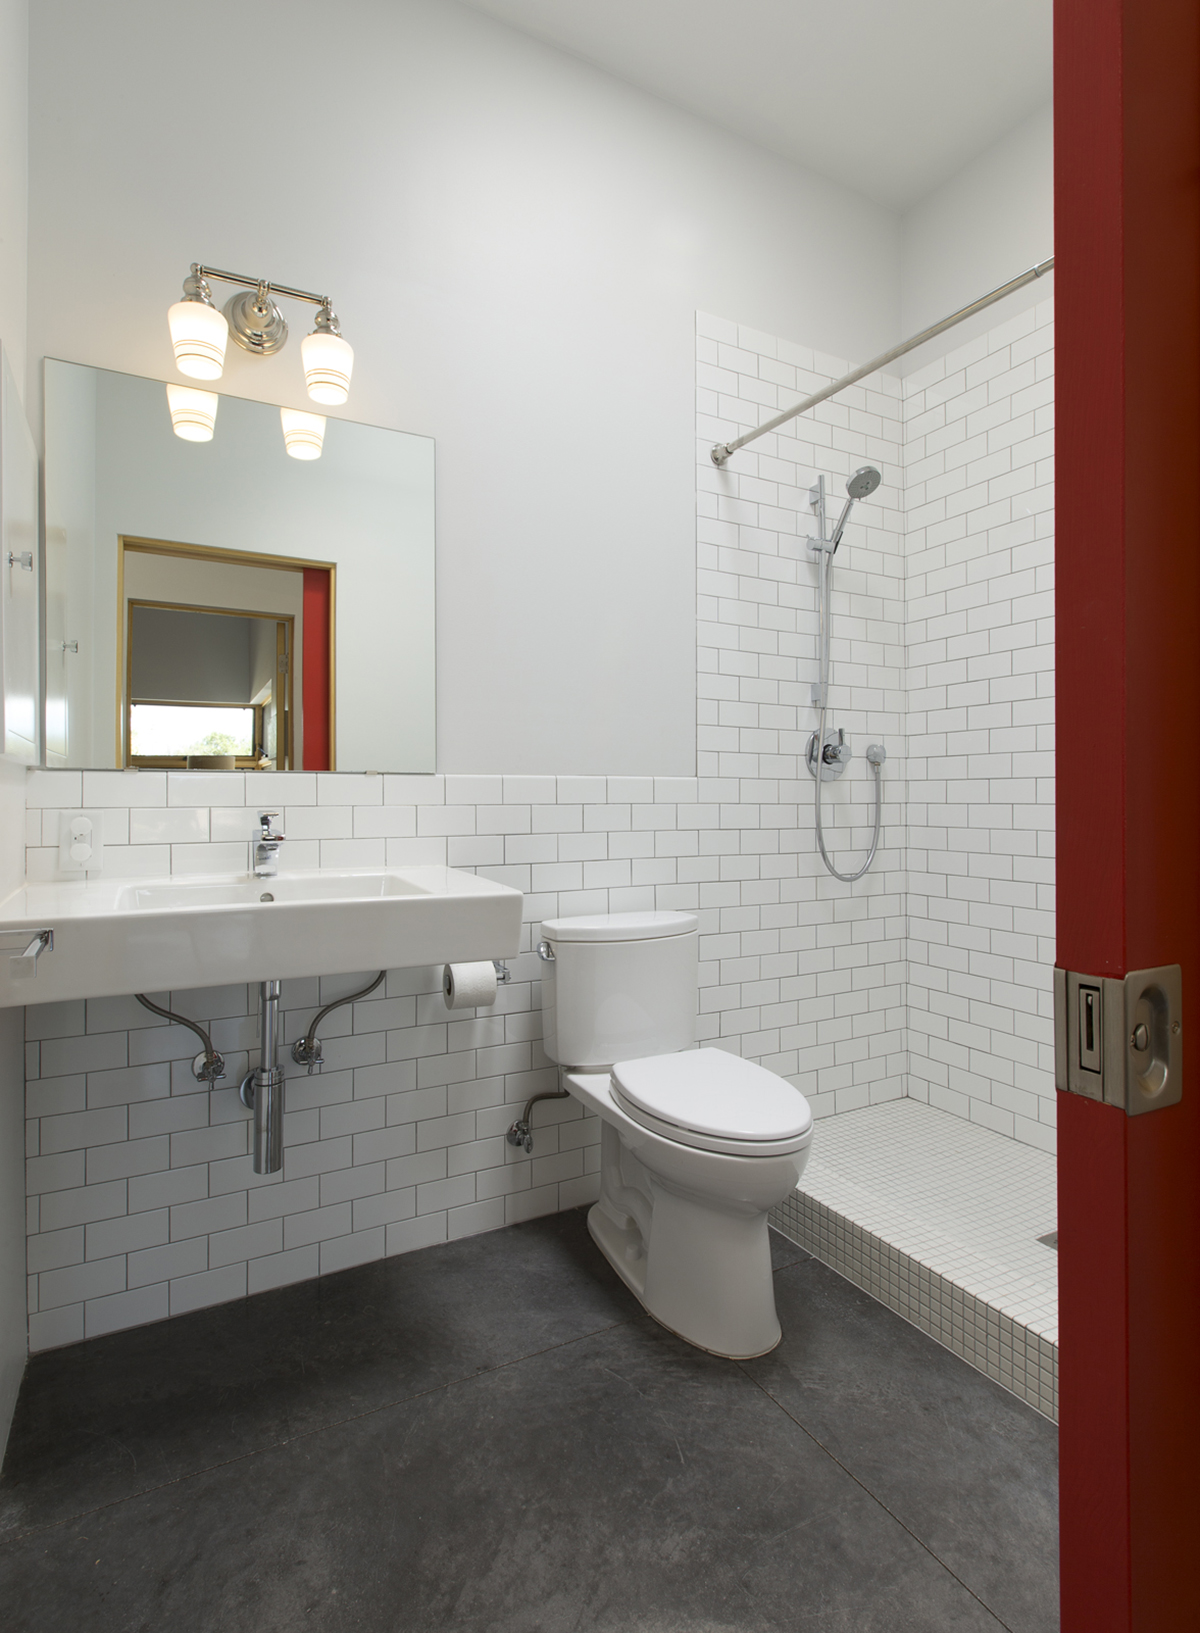 A home designer envisioned a white tiled bathroom with a red door, giving it a touch of Santa Fe charm.